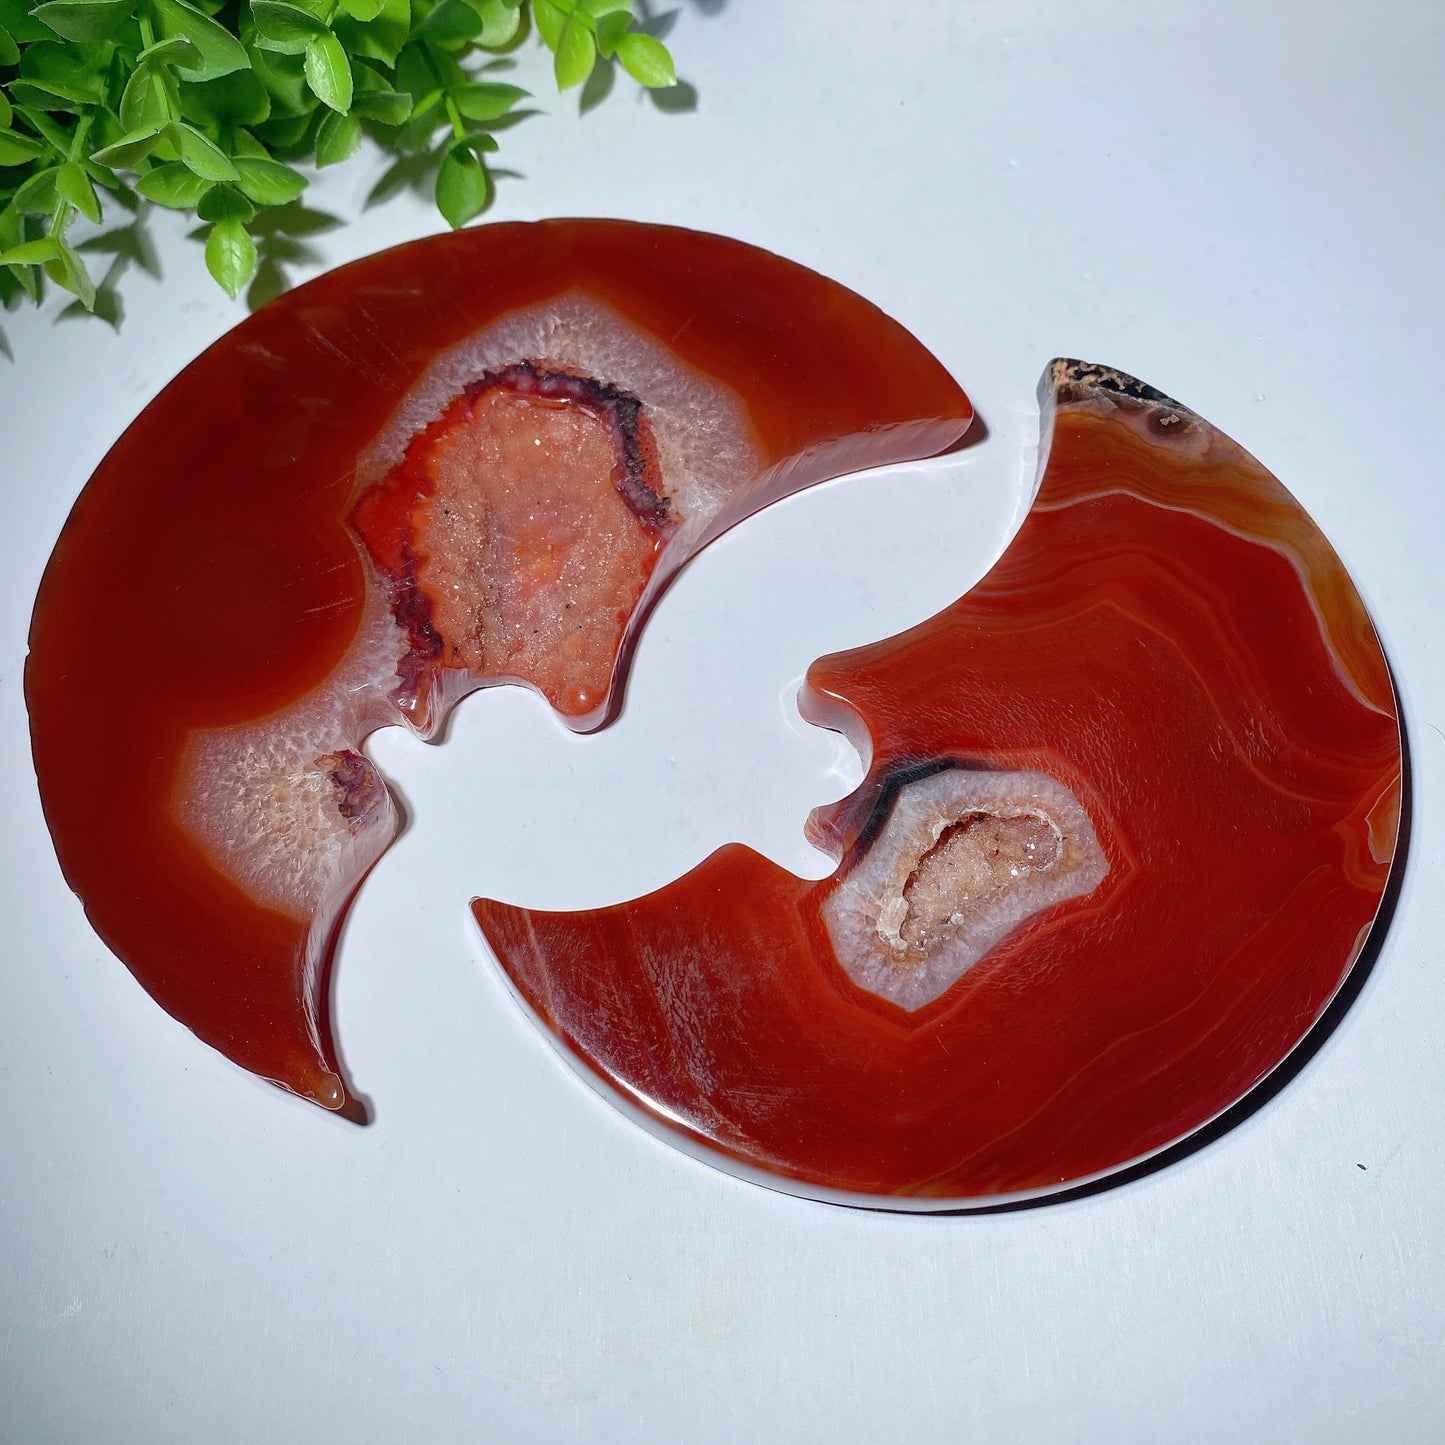 5.0" Druzy Carnelian Moon Carving with Stand Bulk Wholesale